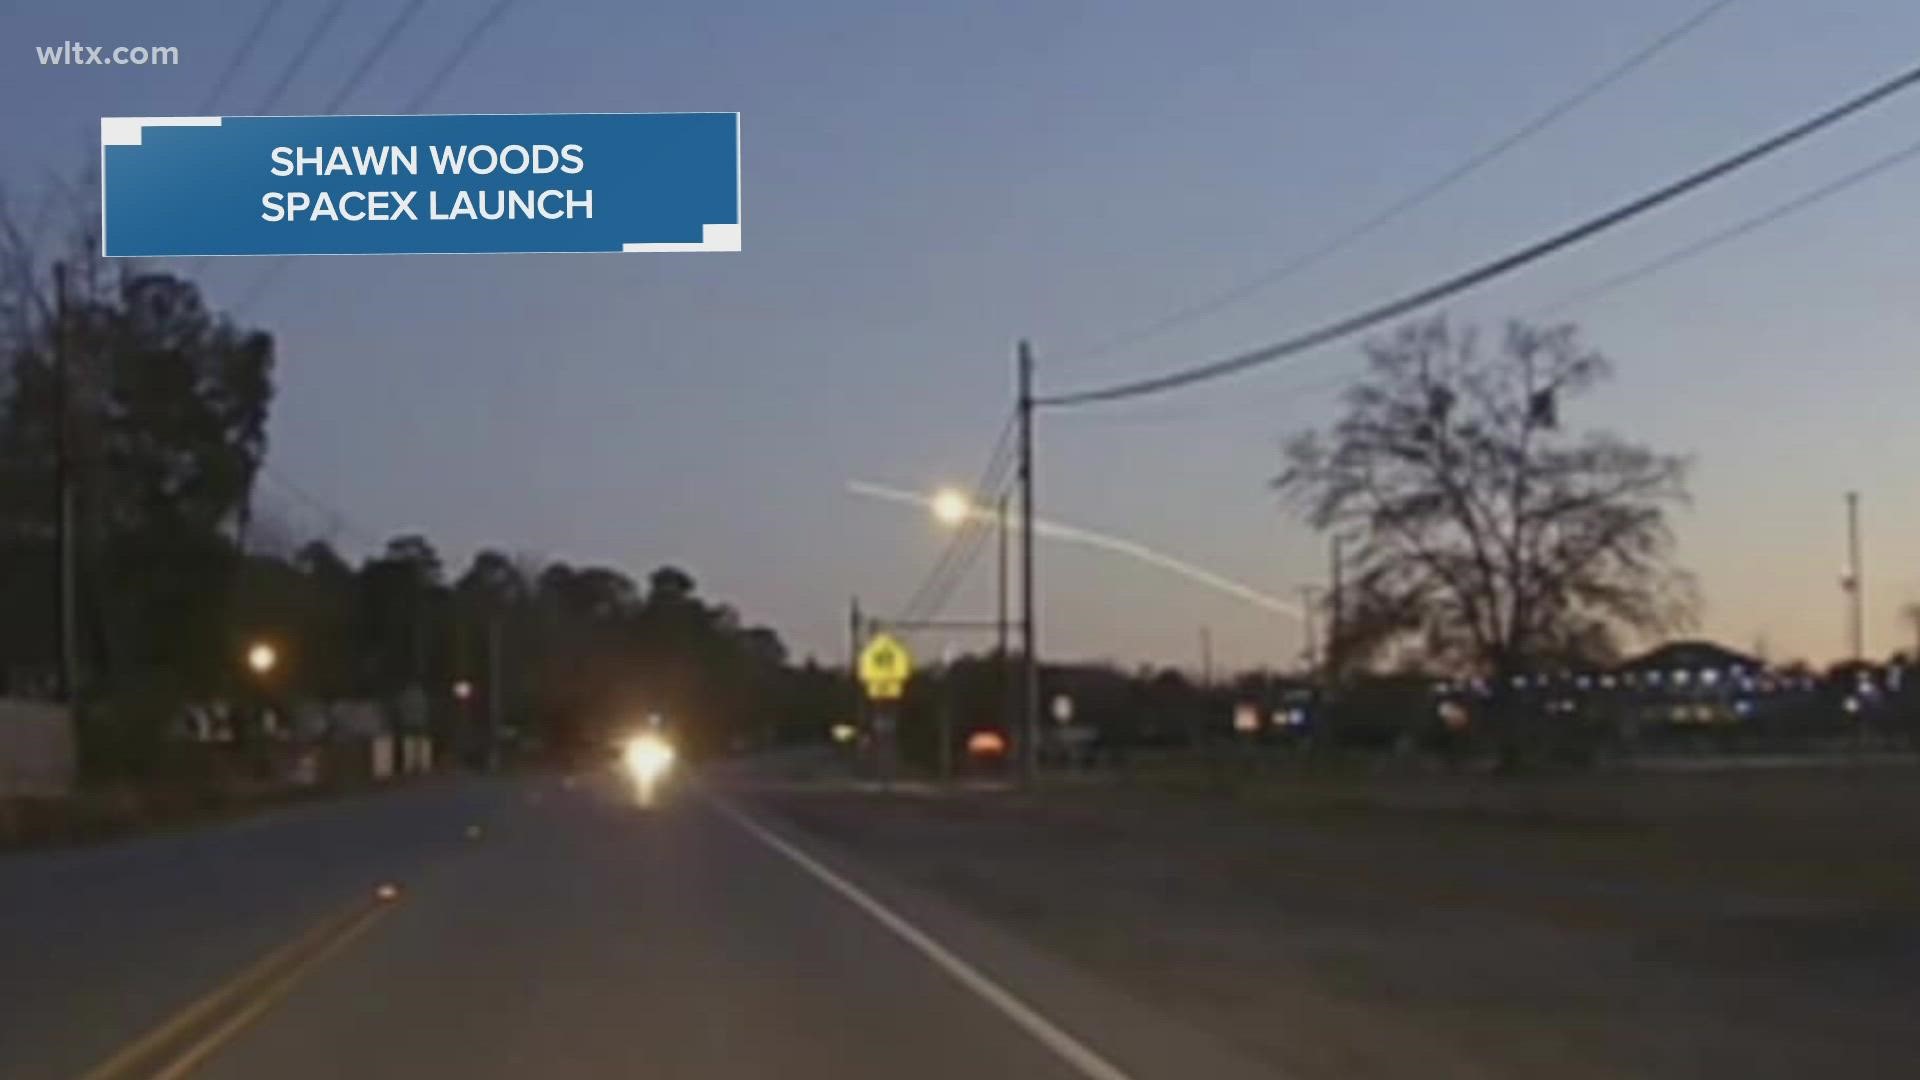 A WLTX viewer caught a glimpse in the Midlands of a SpaceX rocket launch from Cape Canaveral.